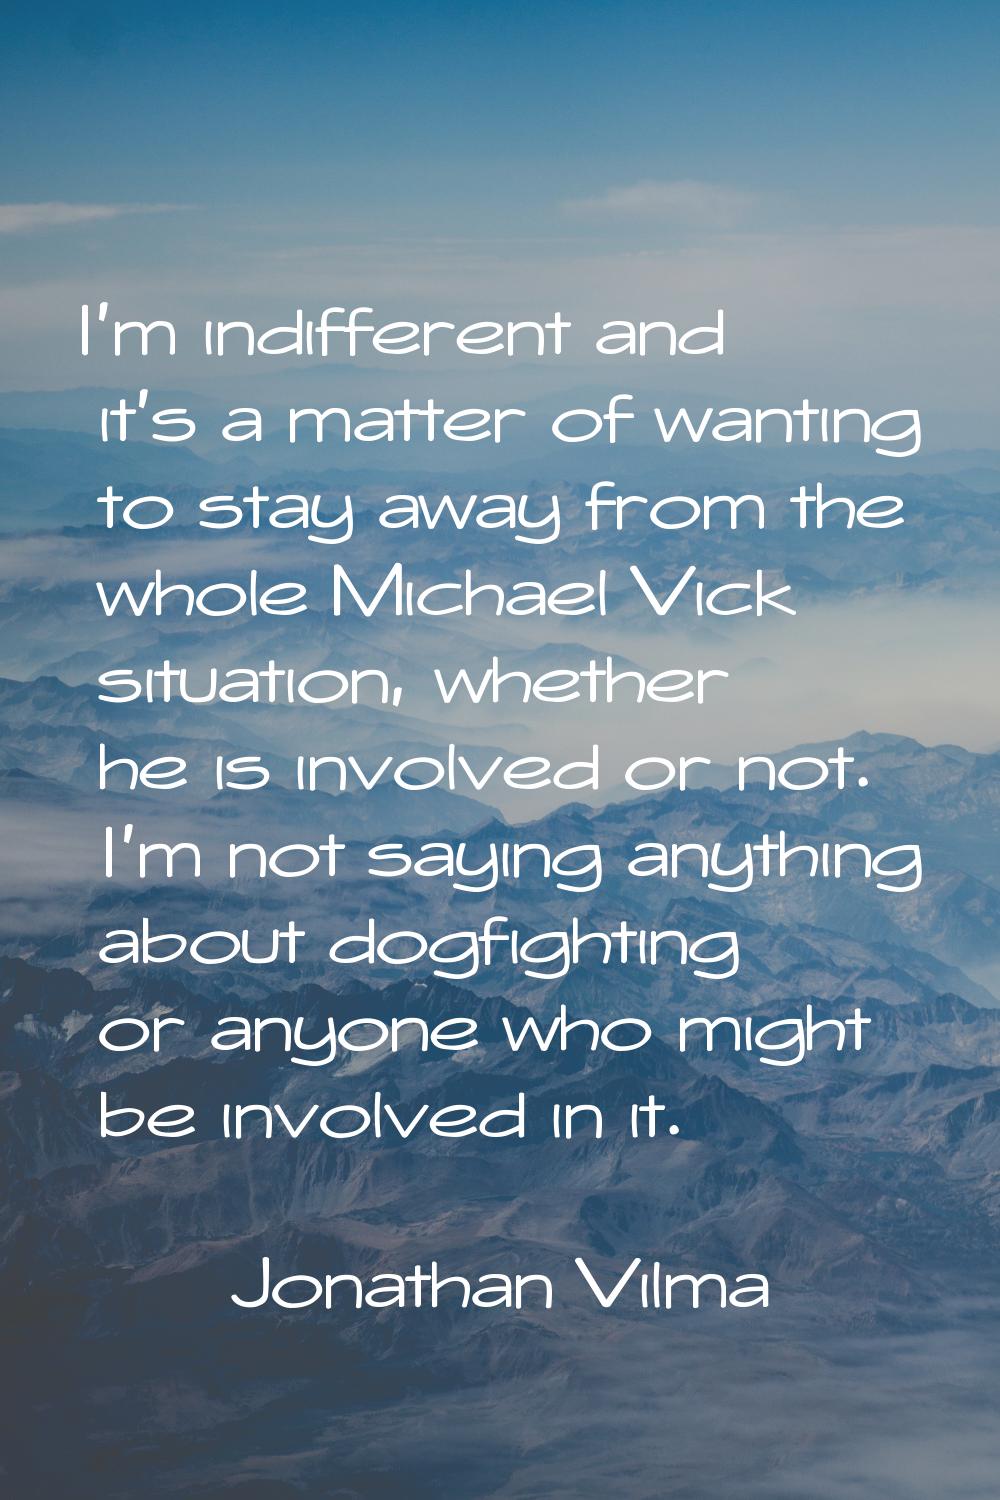 I'm indifferent and it's a matter of wanting to stay away from the whole Michael Vick situation, wh